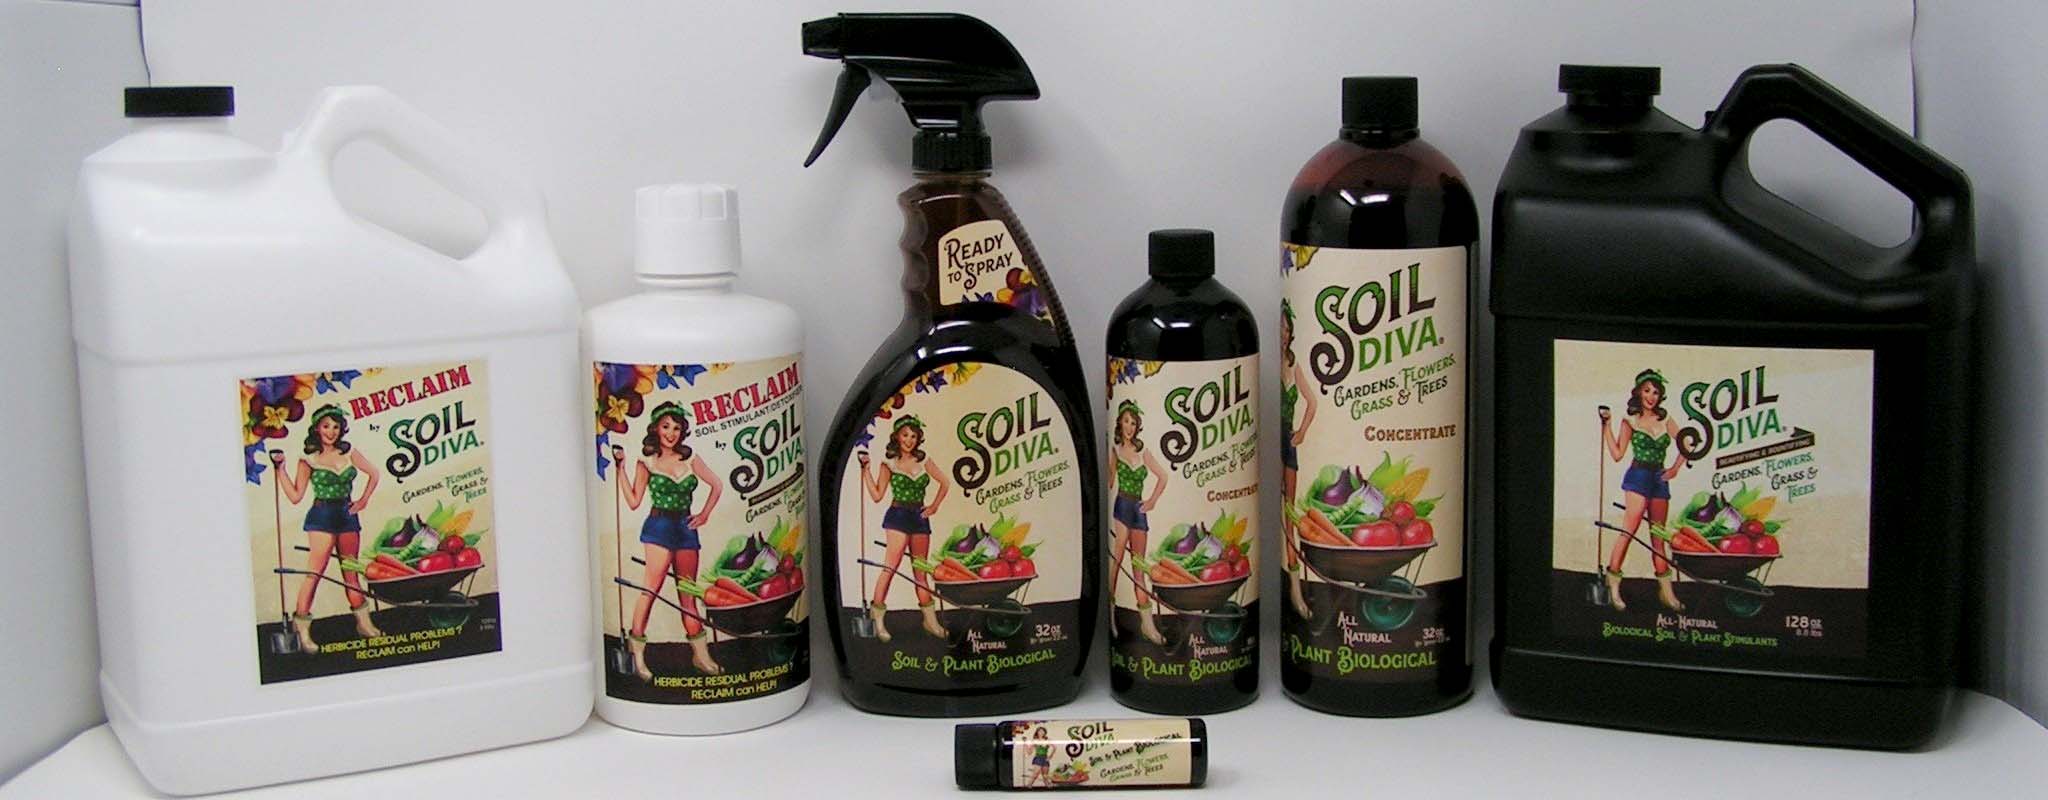 Soil Diva and Reclaim by Soil Diva Product Photo